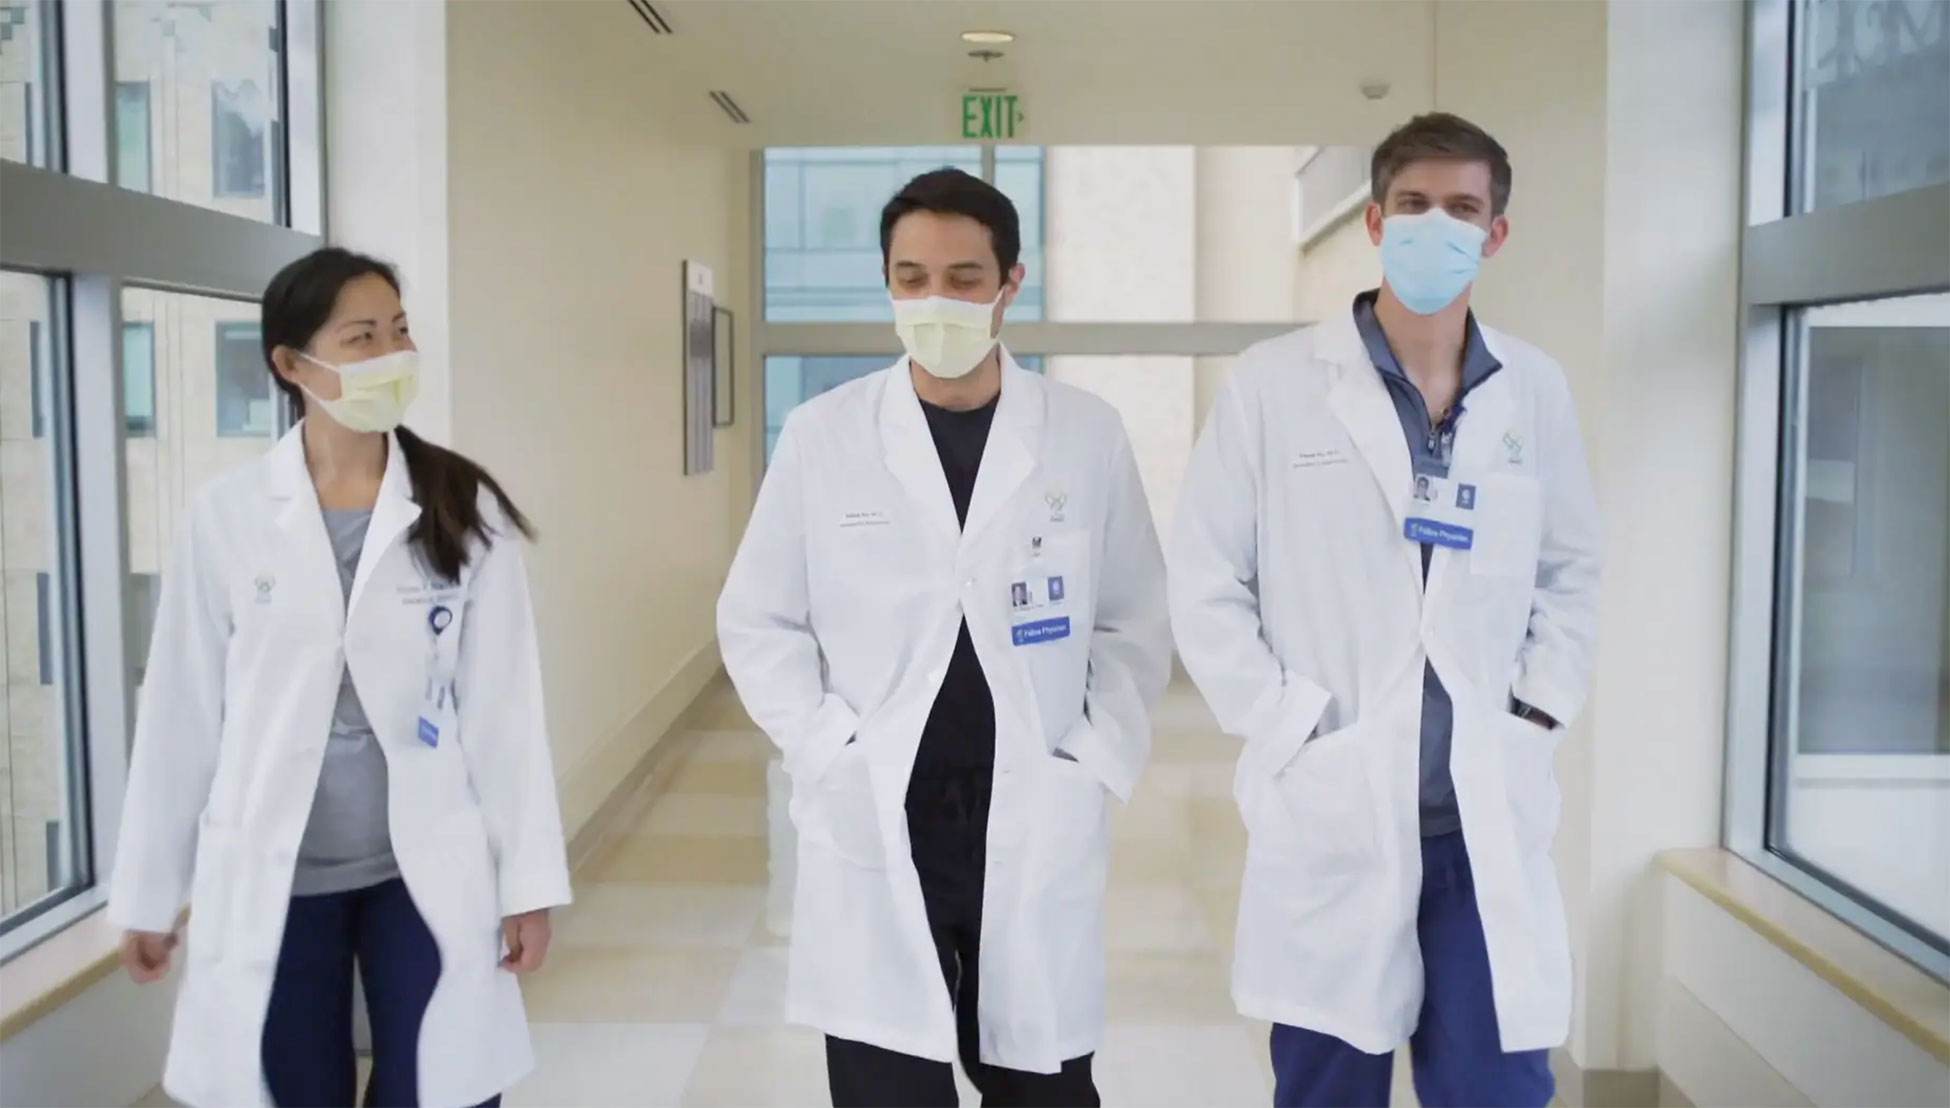 Three medical students in white coats wearing face masks walk down a hallway.